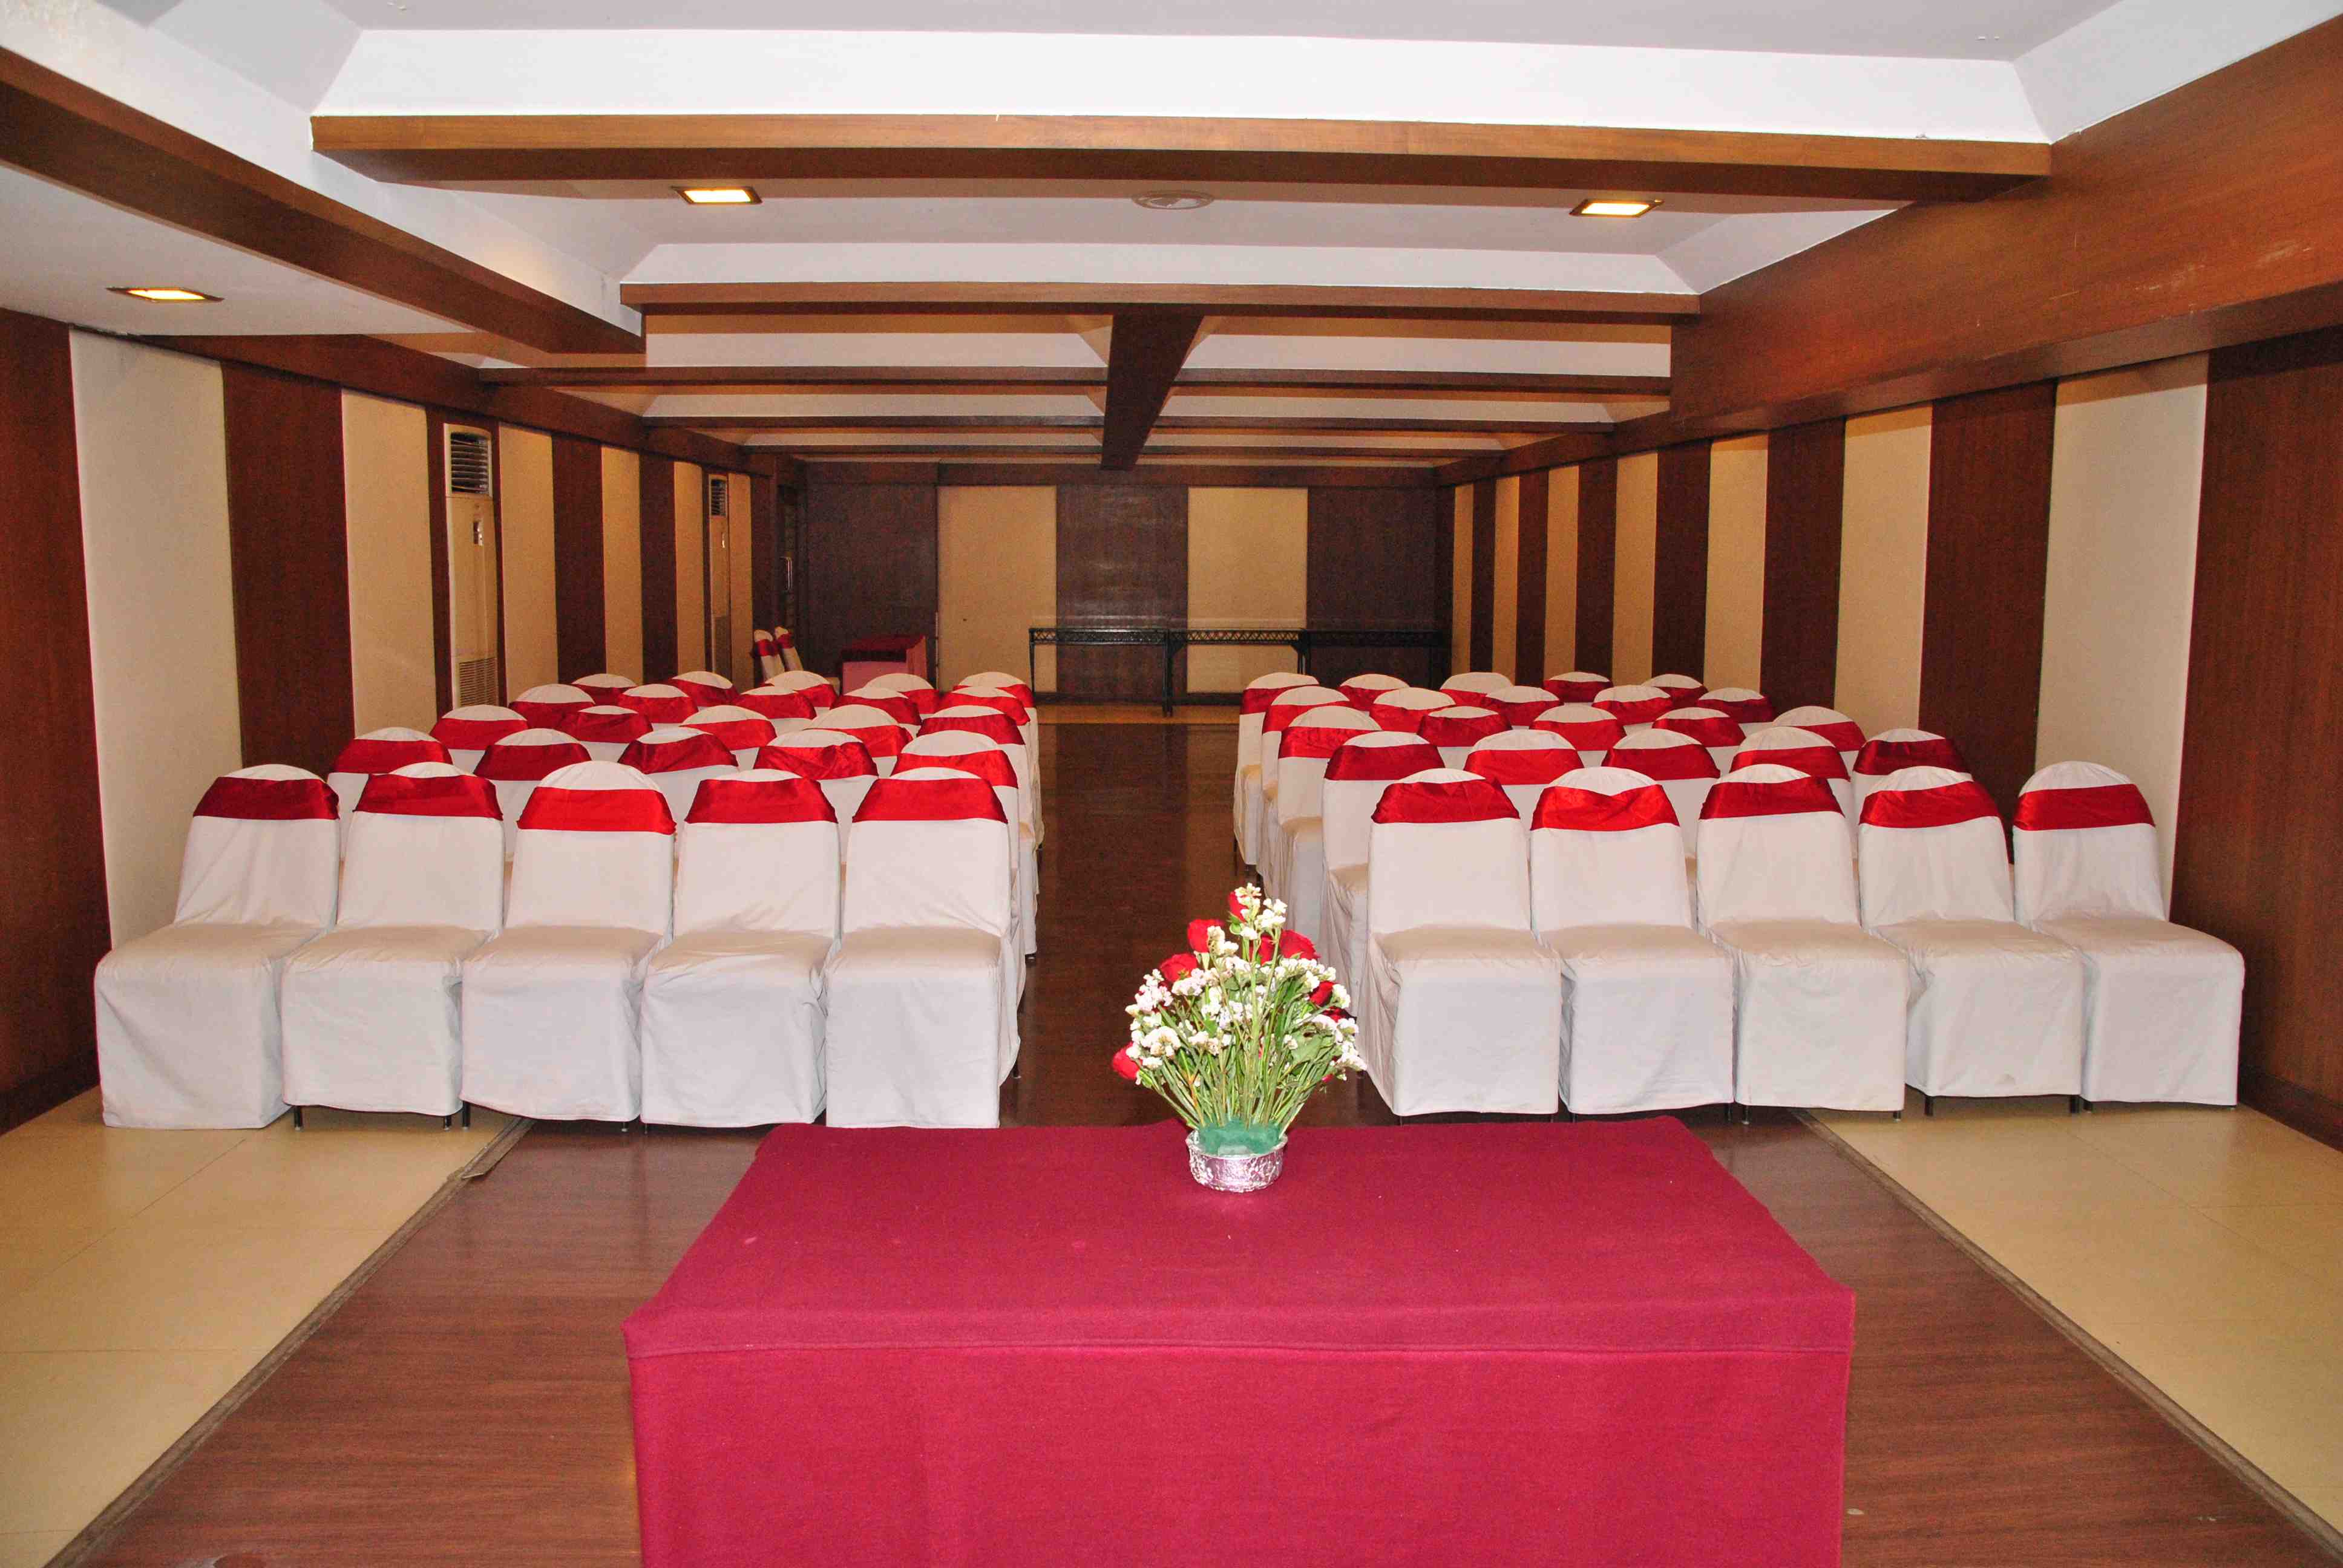 Seating Arrangement at Assembly hall in Hotel Aurora Towers